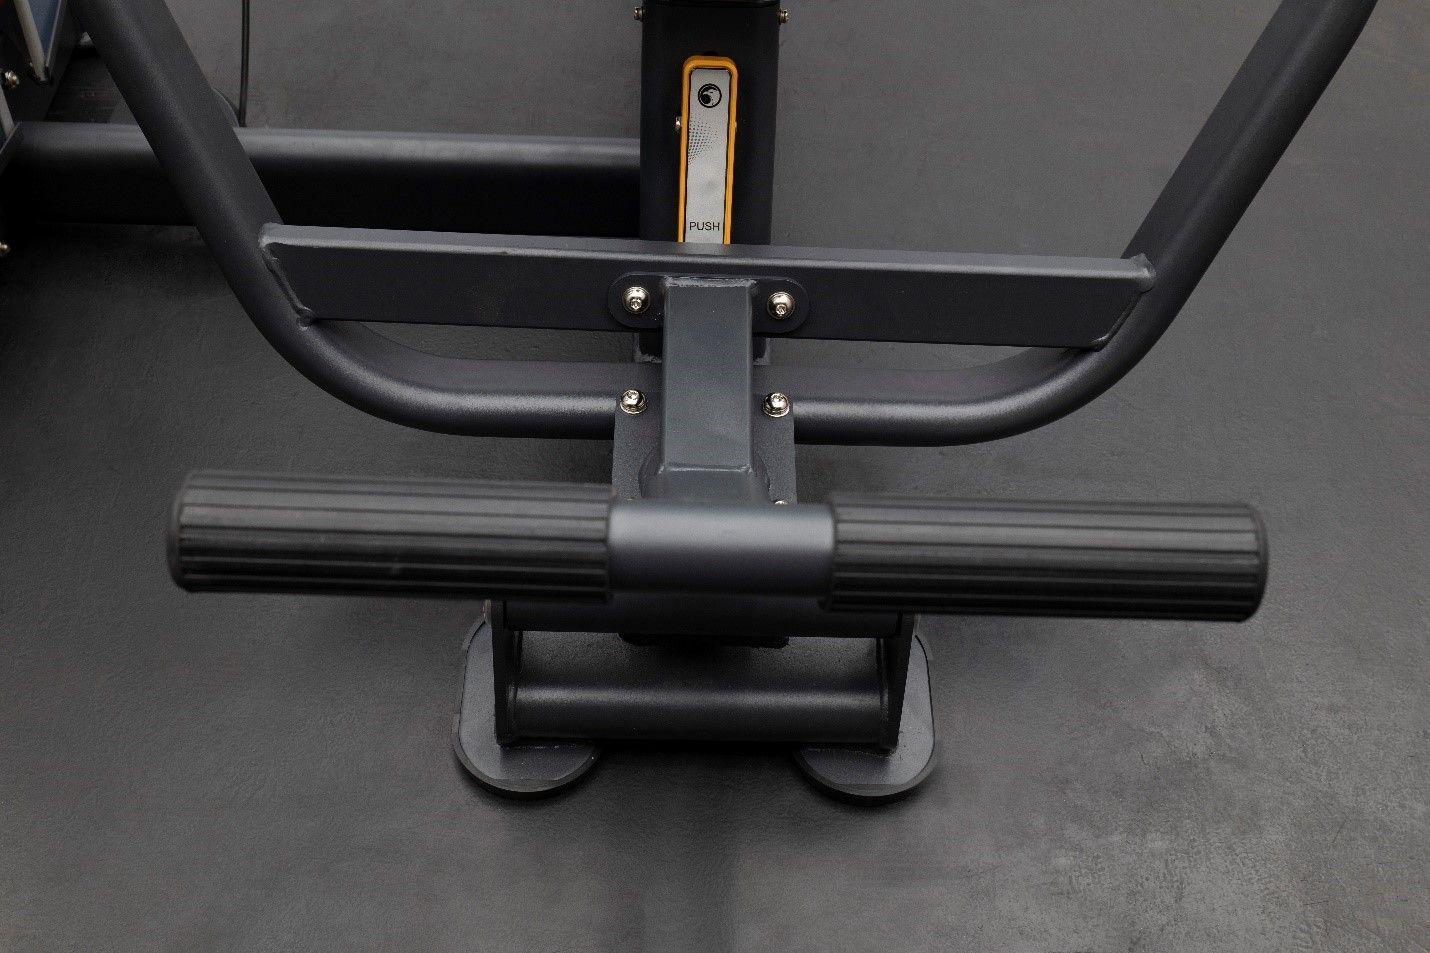 Foot lever for easy entrance/exit of machine